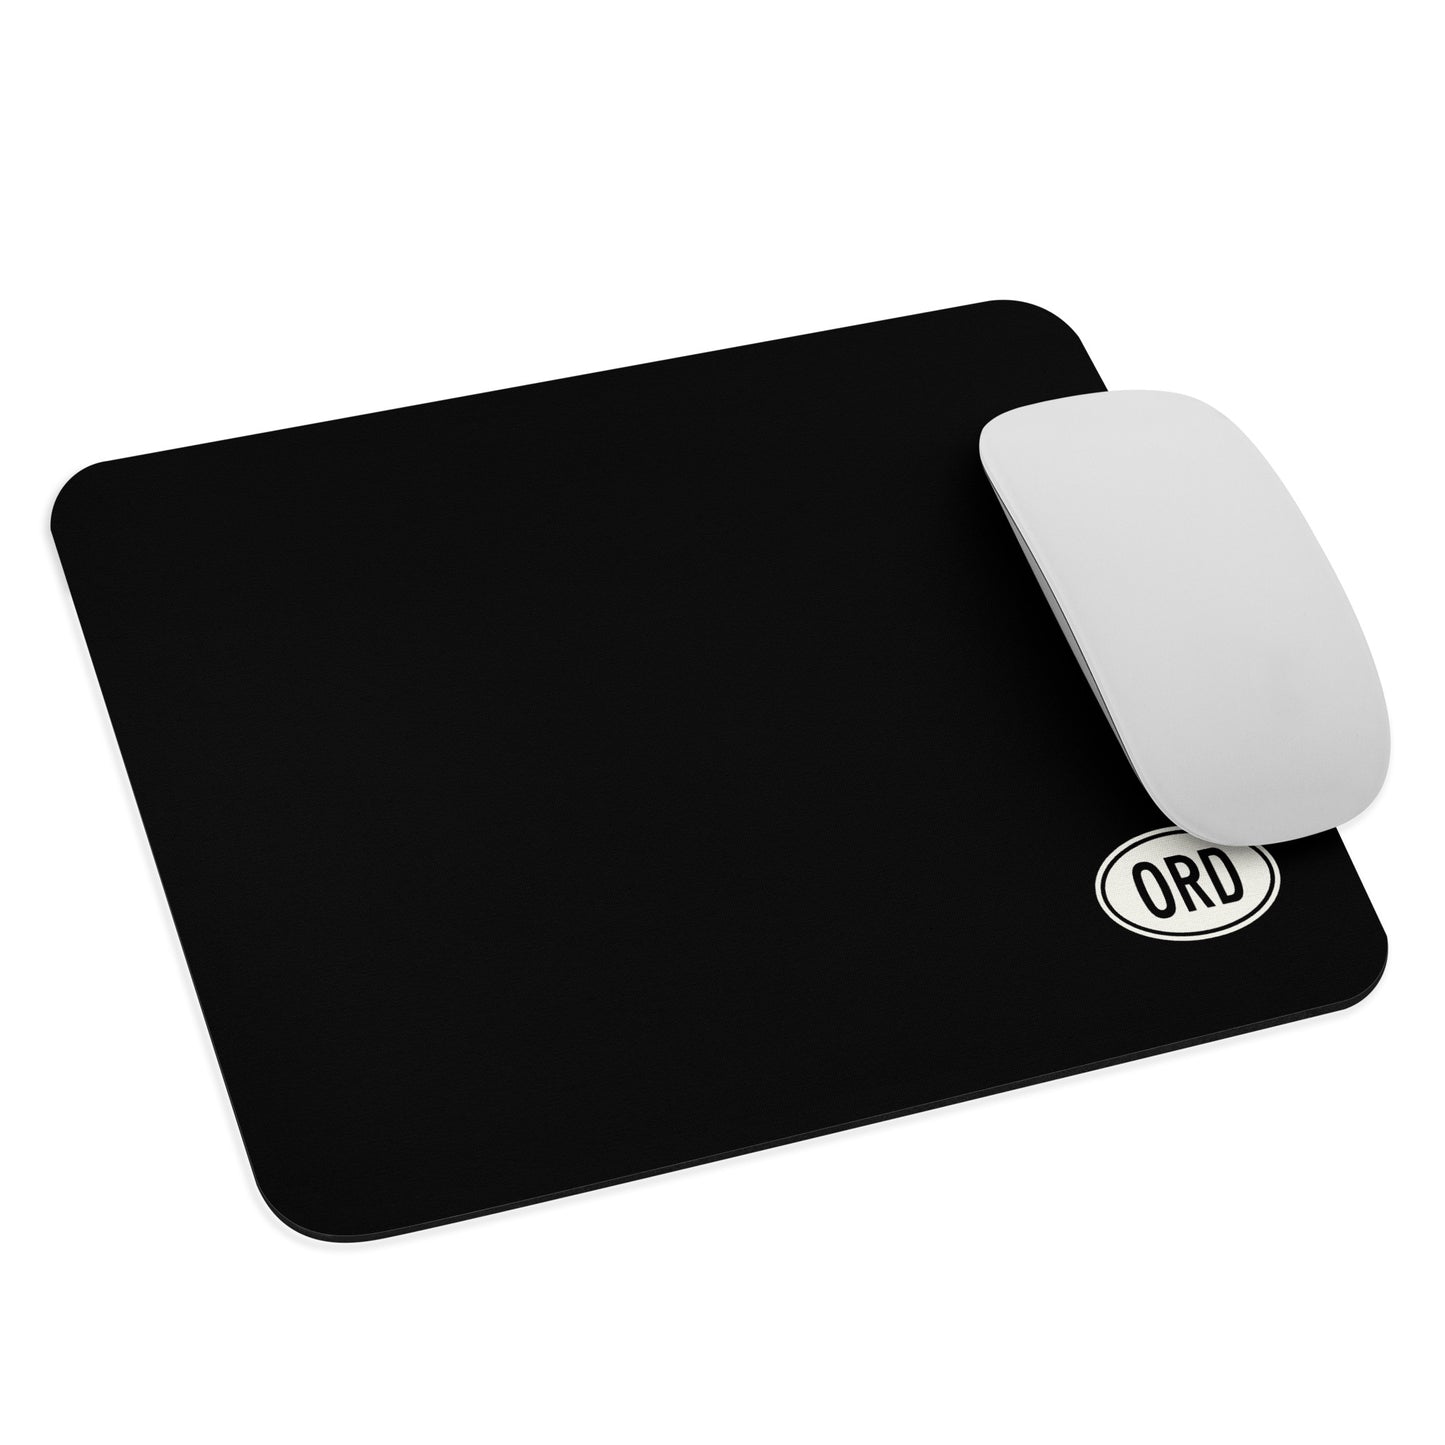 Unique Travel Gift Mouse Pad - White Oval • ORD Chicago • YHM Designs - Image 03